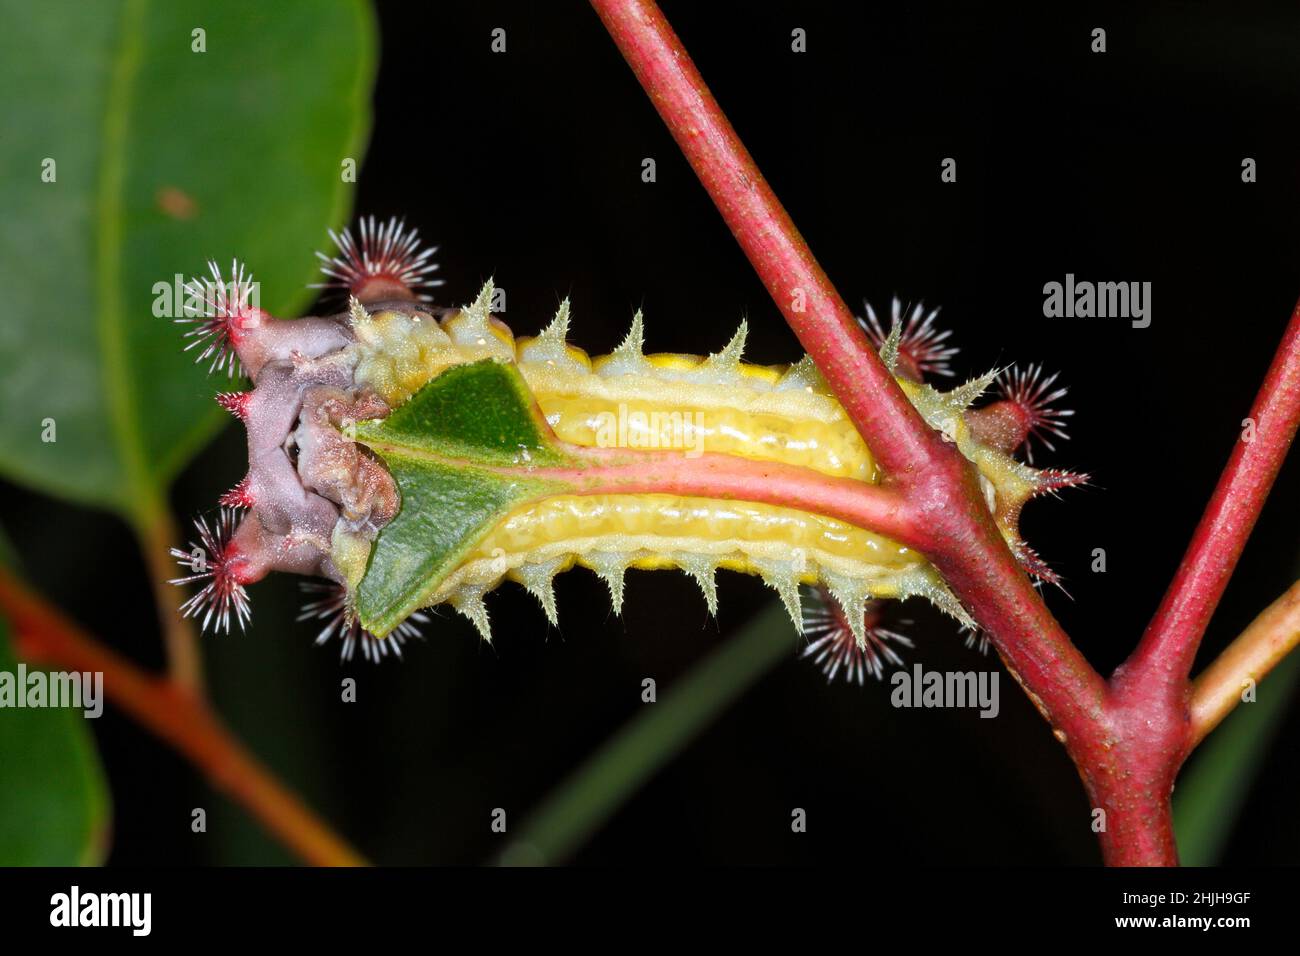 Mottled Cup Moth caterpillar, Doratifera vulnerans. These caterpillars have stinging spines that contain toxins, and they evert their spines when dist Stock Photo